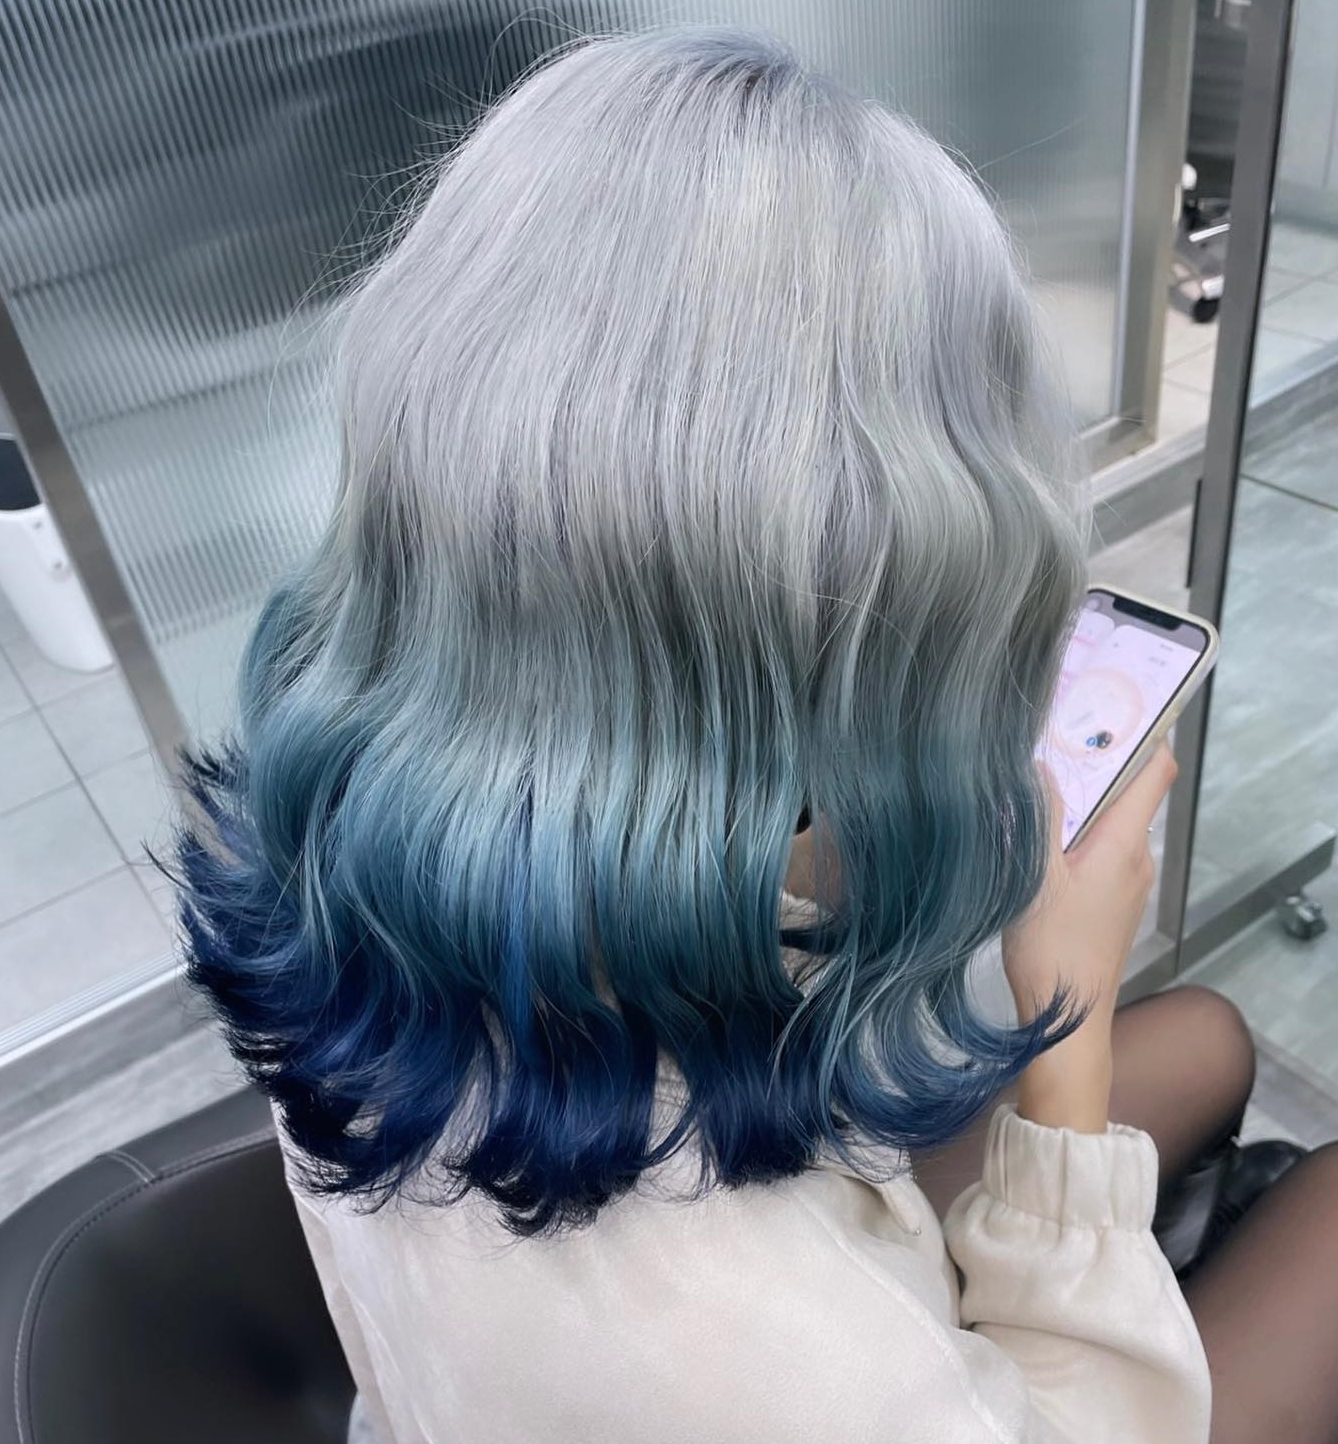 5 Shades Of Blue Hair Look Chic  Cool By Going Bold  GirlStyle Singapore